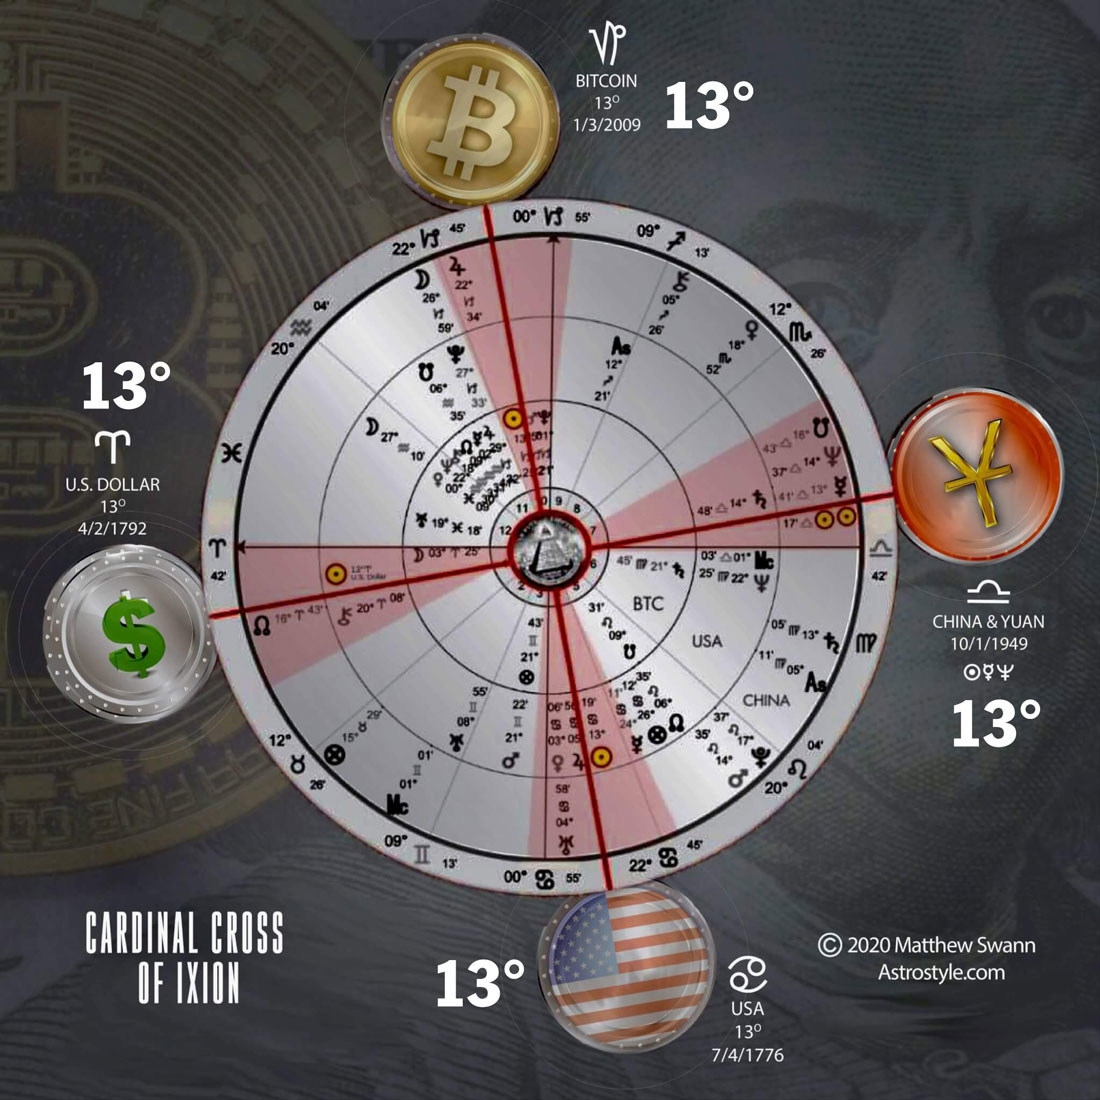 2021's predictions: What astrologers say about 2021?